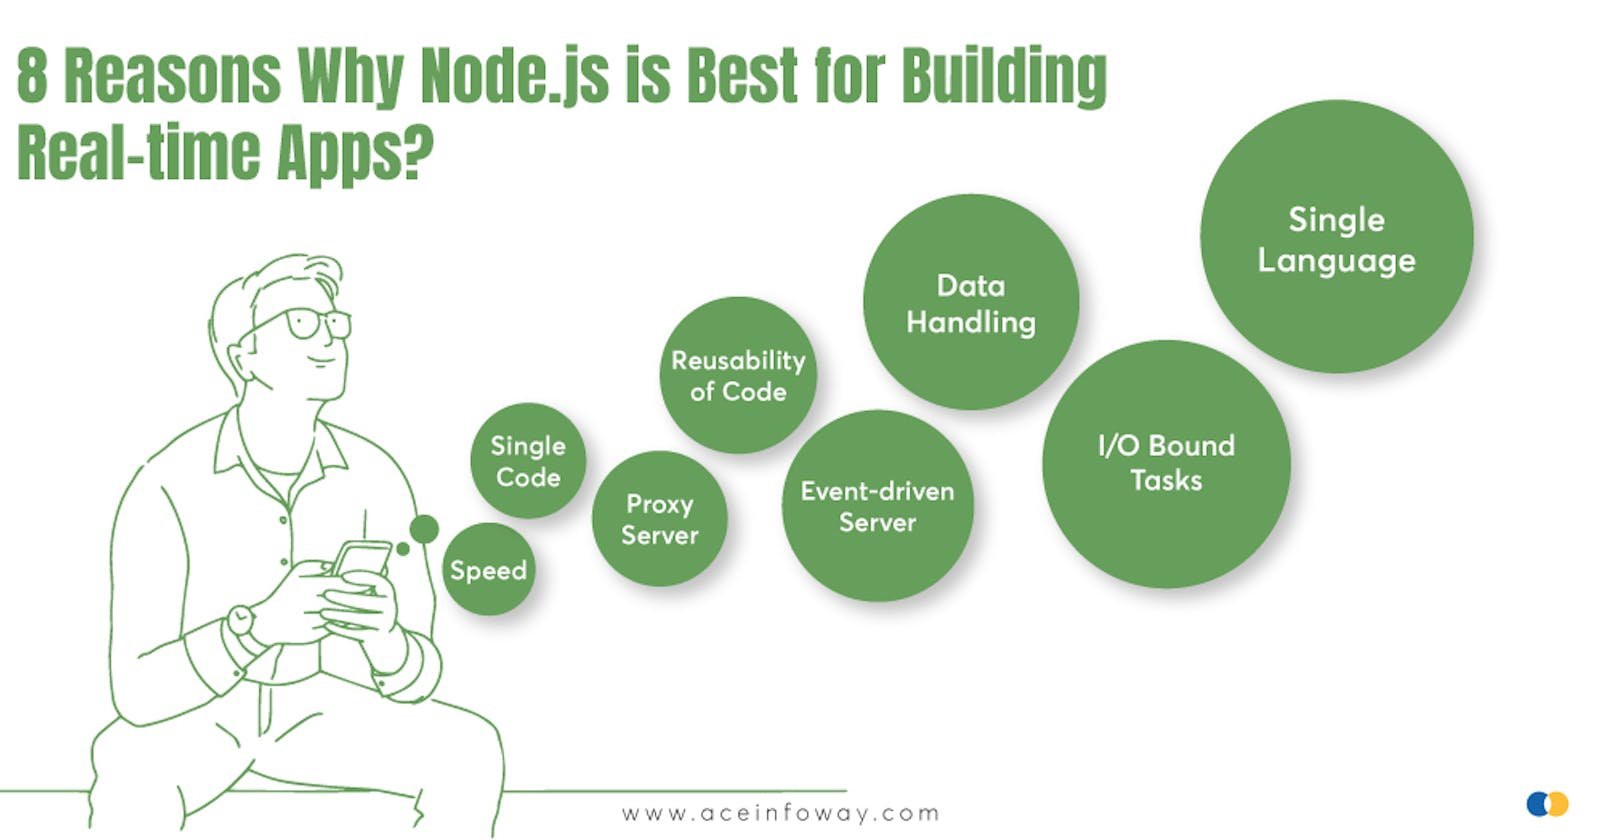 A Guide to Choose Node.js to Build Real-time Apps